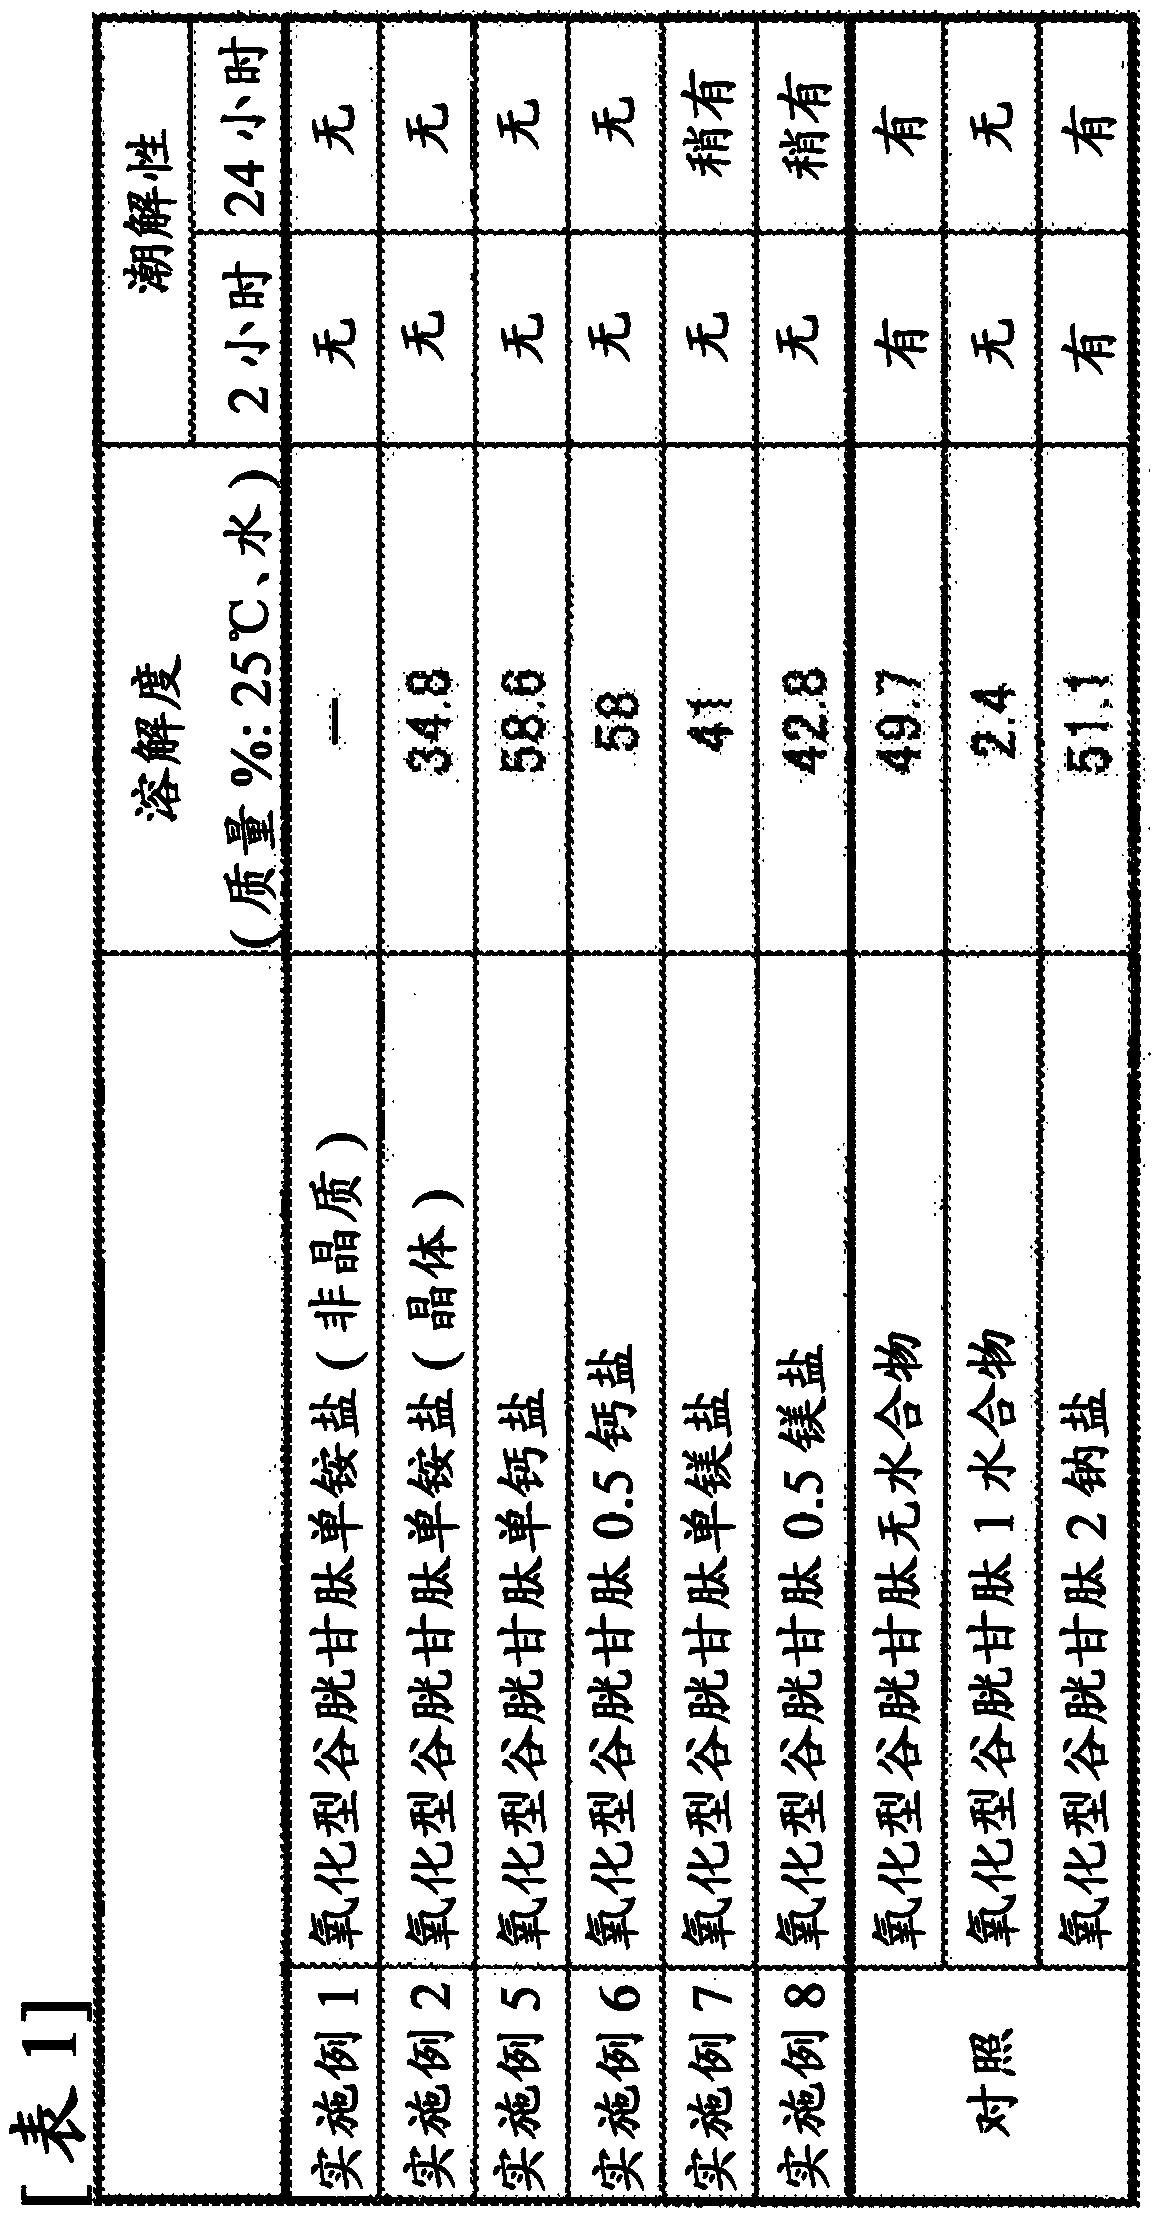 Solid oxidized glutathione salt and production method thereof